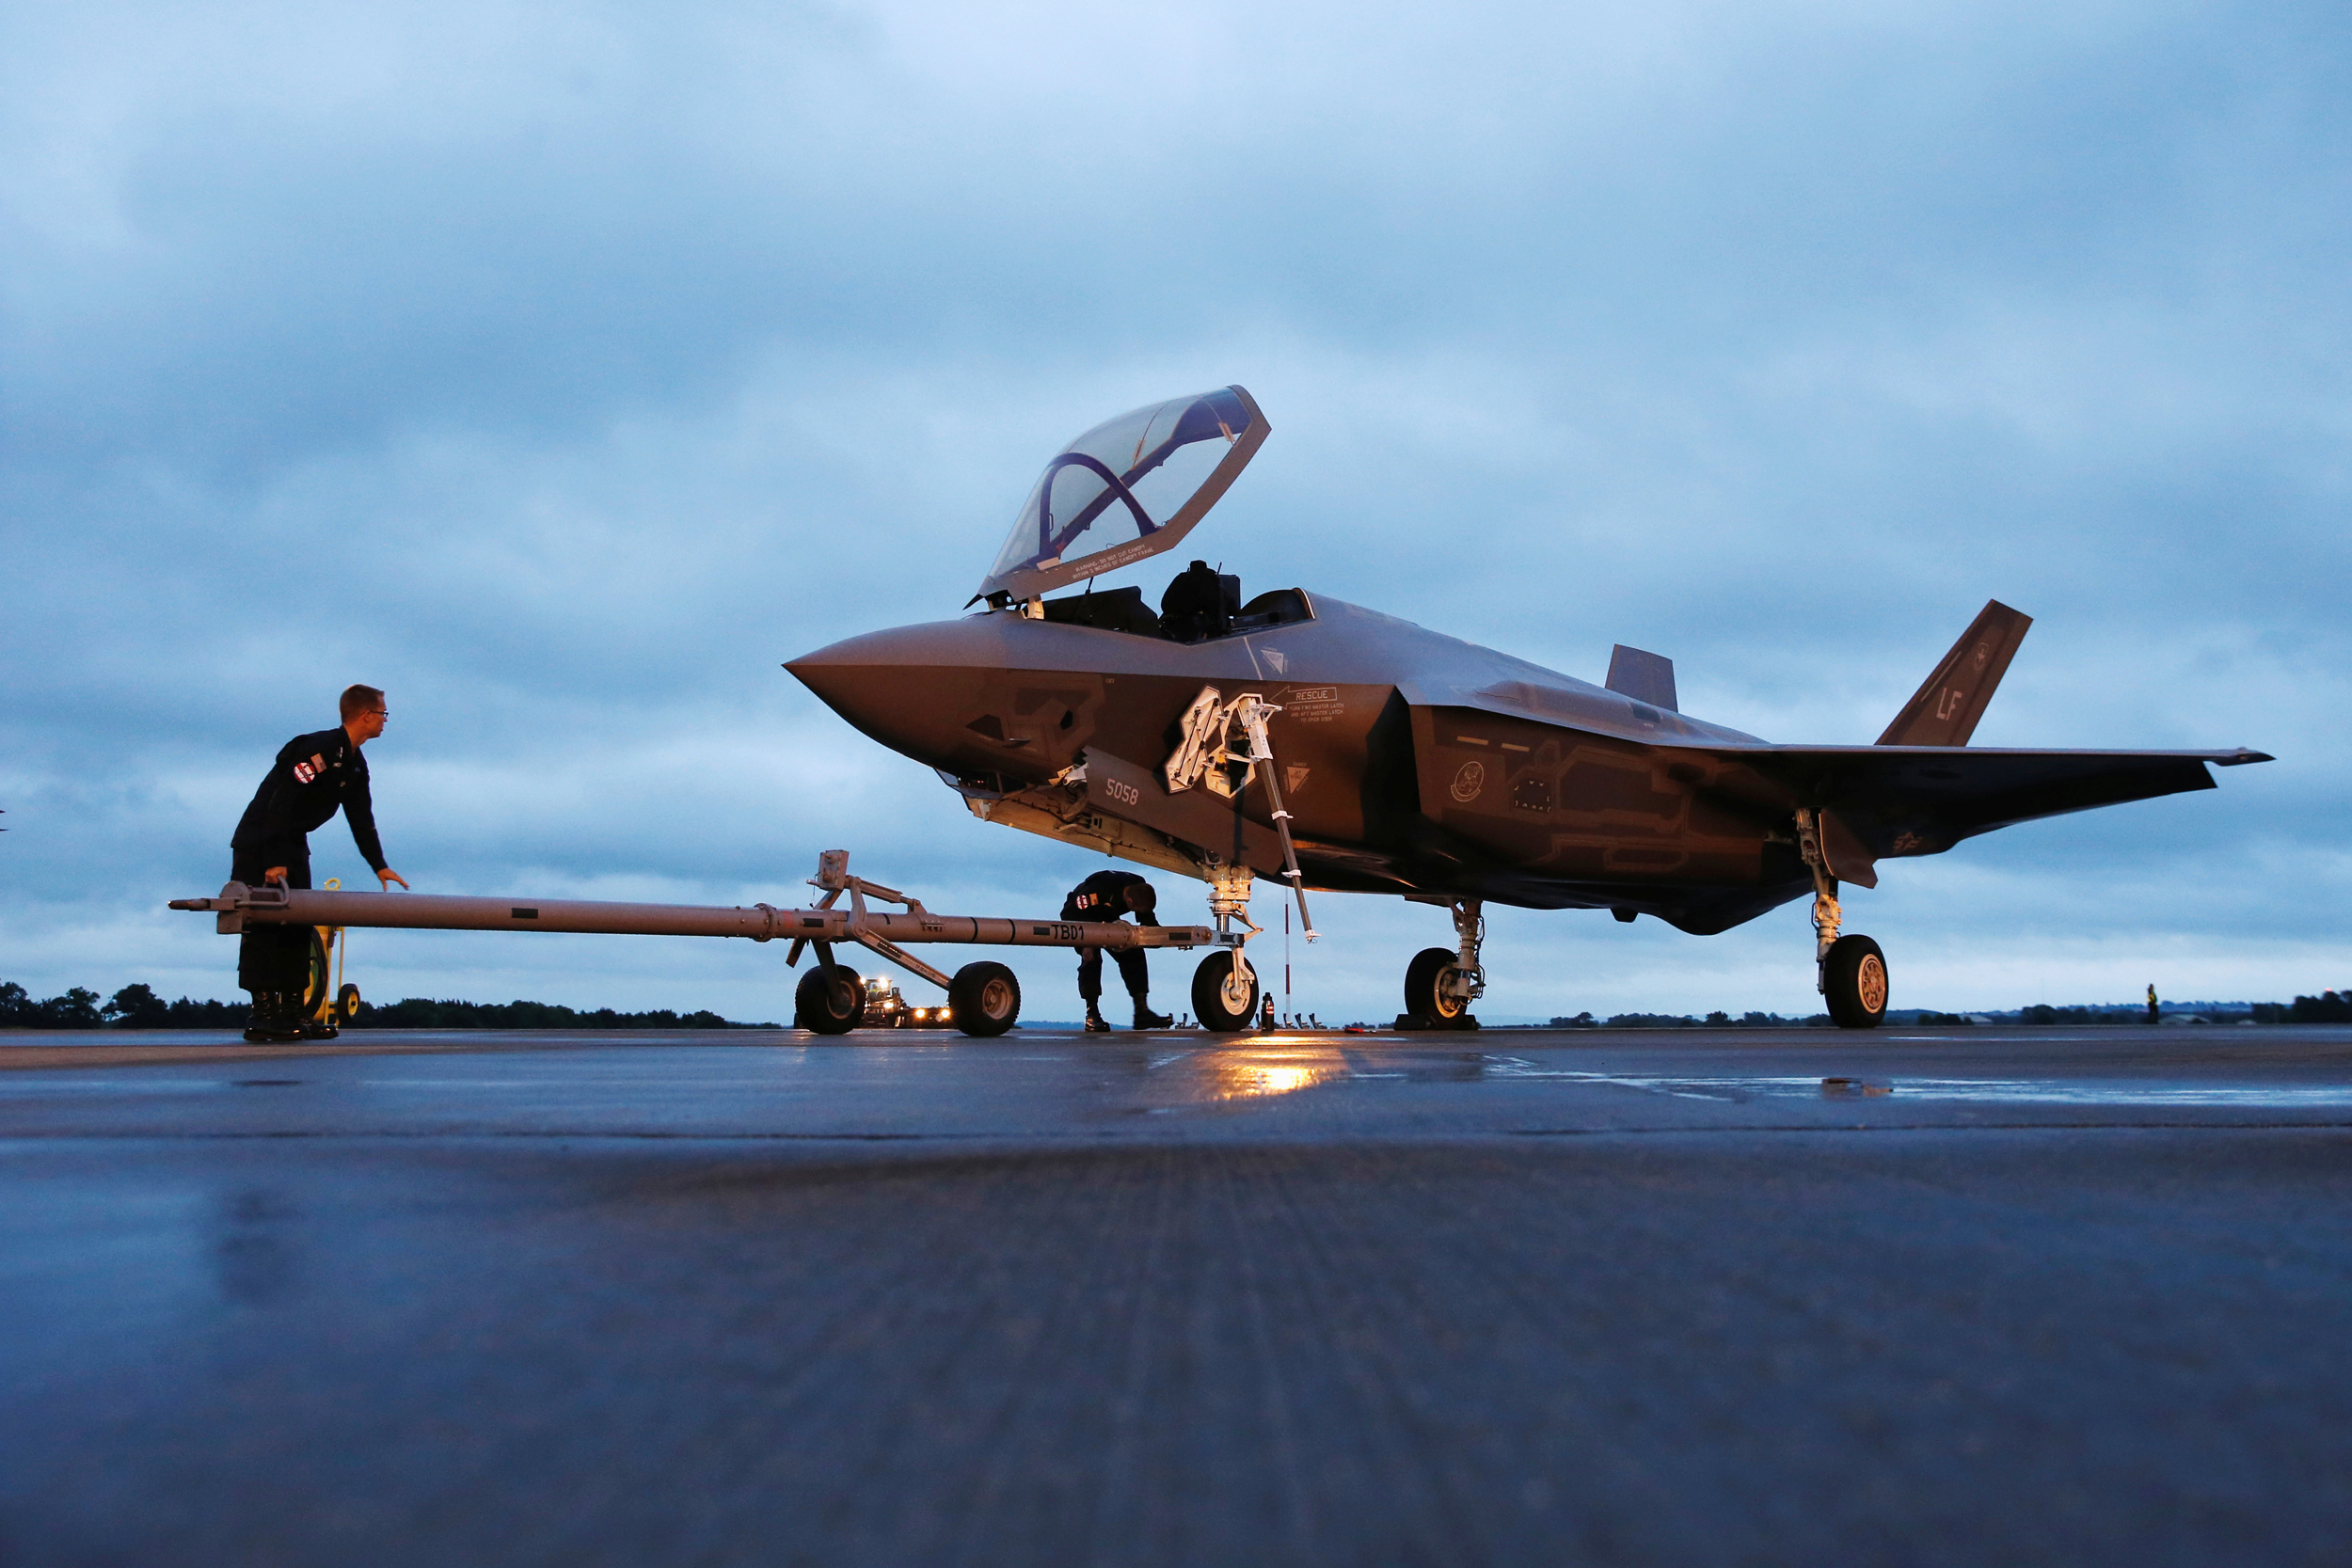 The US Air Force will discuss the F135 engine upgrade process with partners and move to a new logistics support concept for the fifth-generation F-35 fighter jets